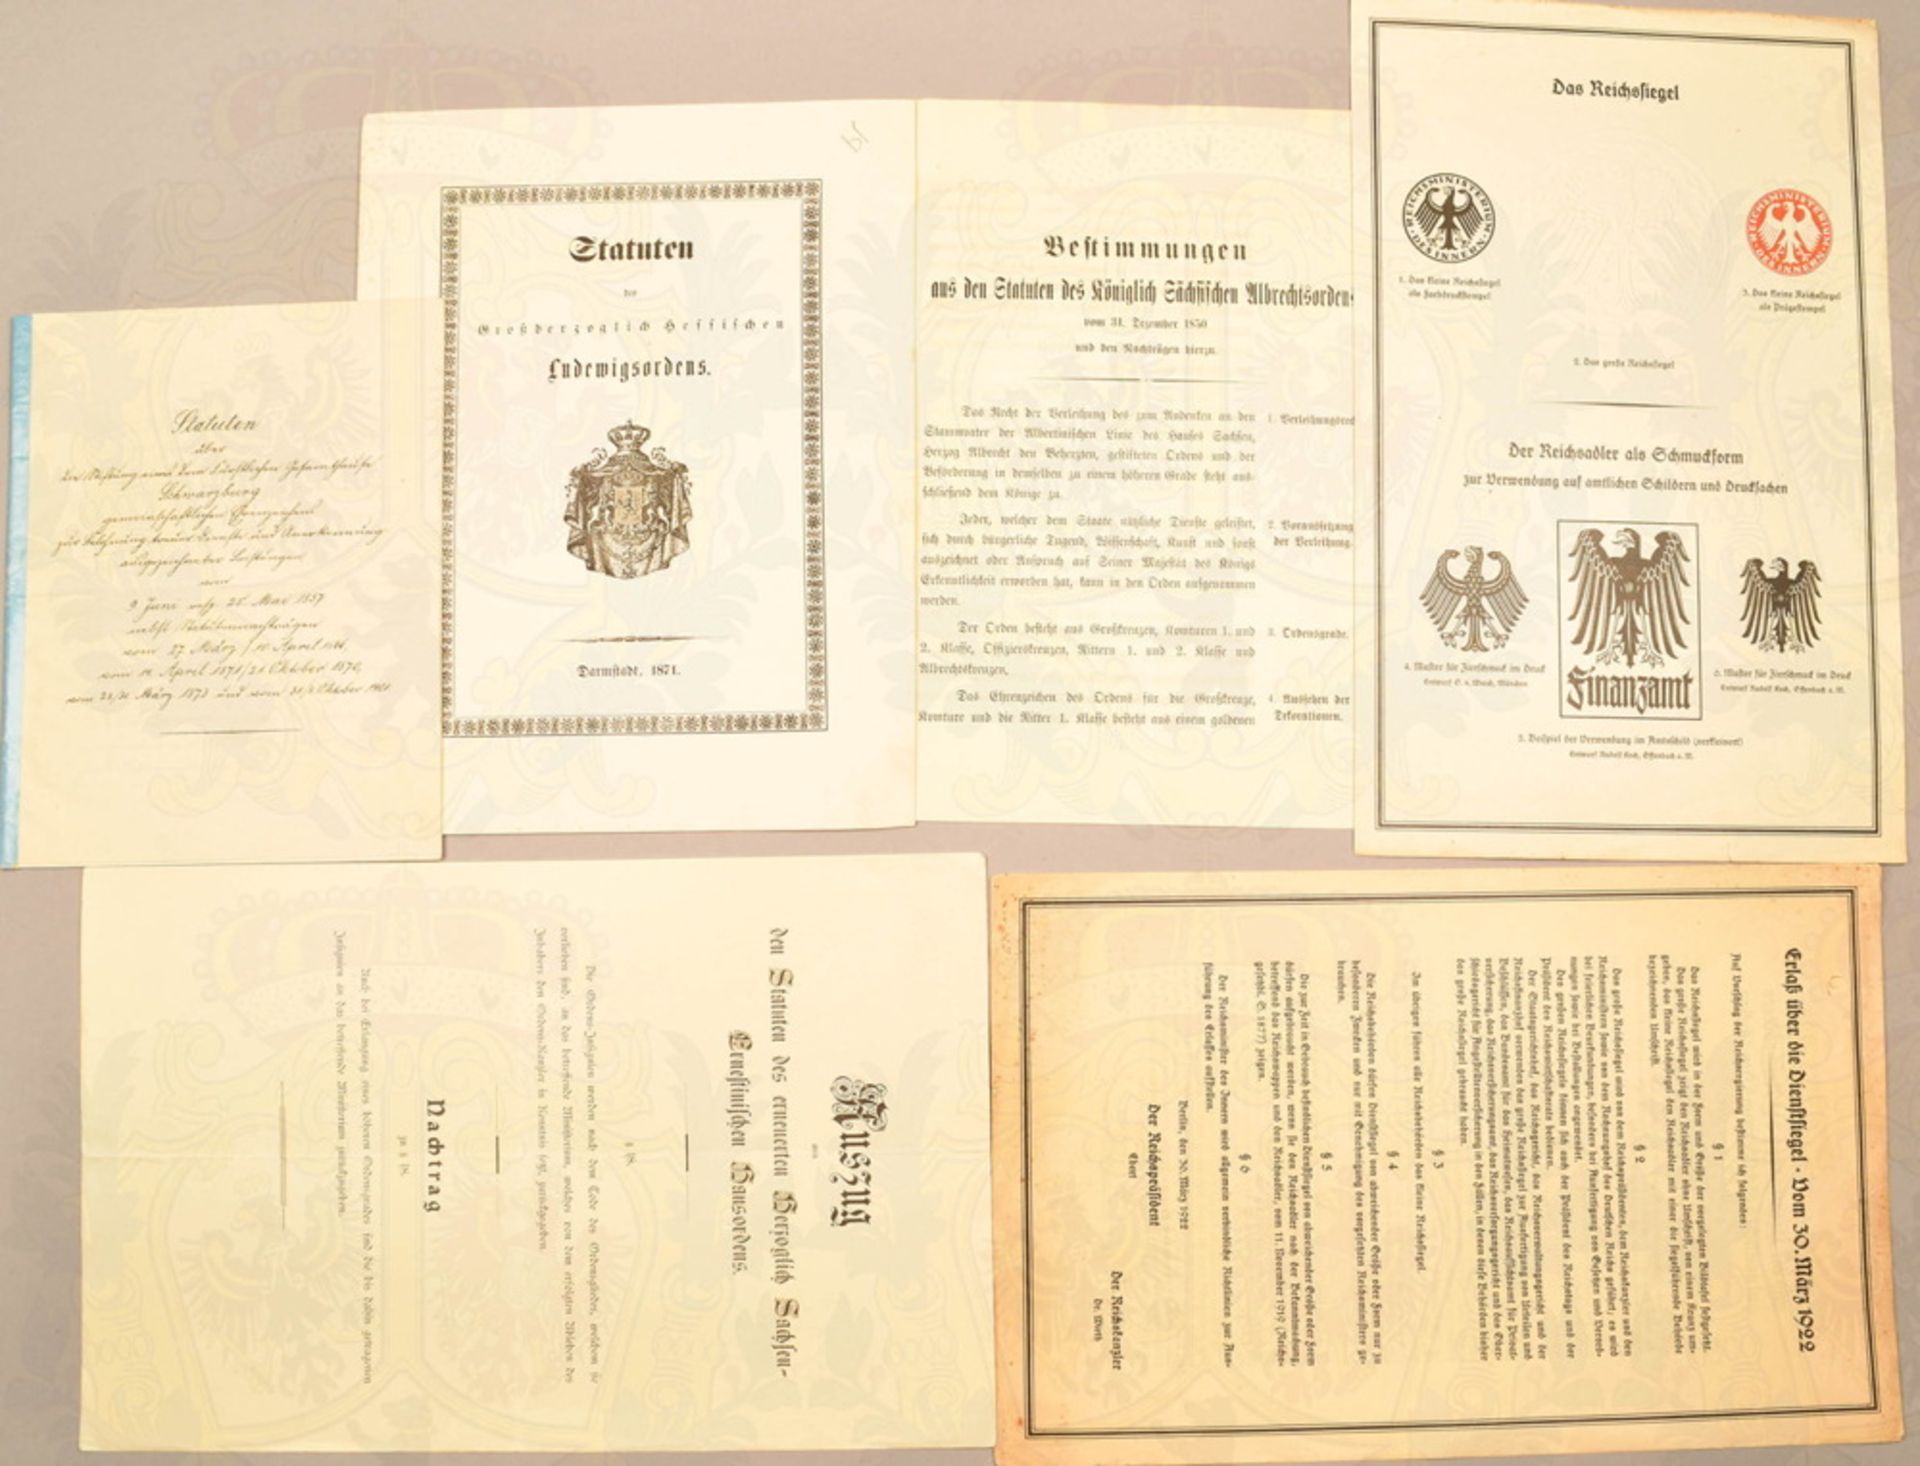 5 statutes for orders and awards 1871-1922